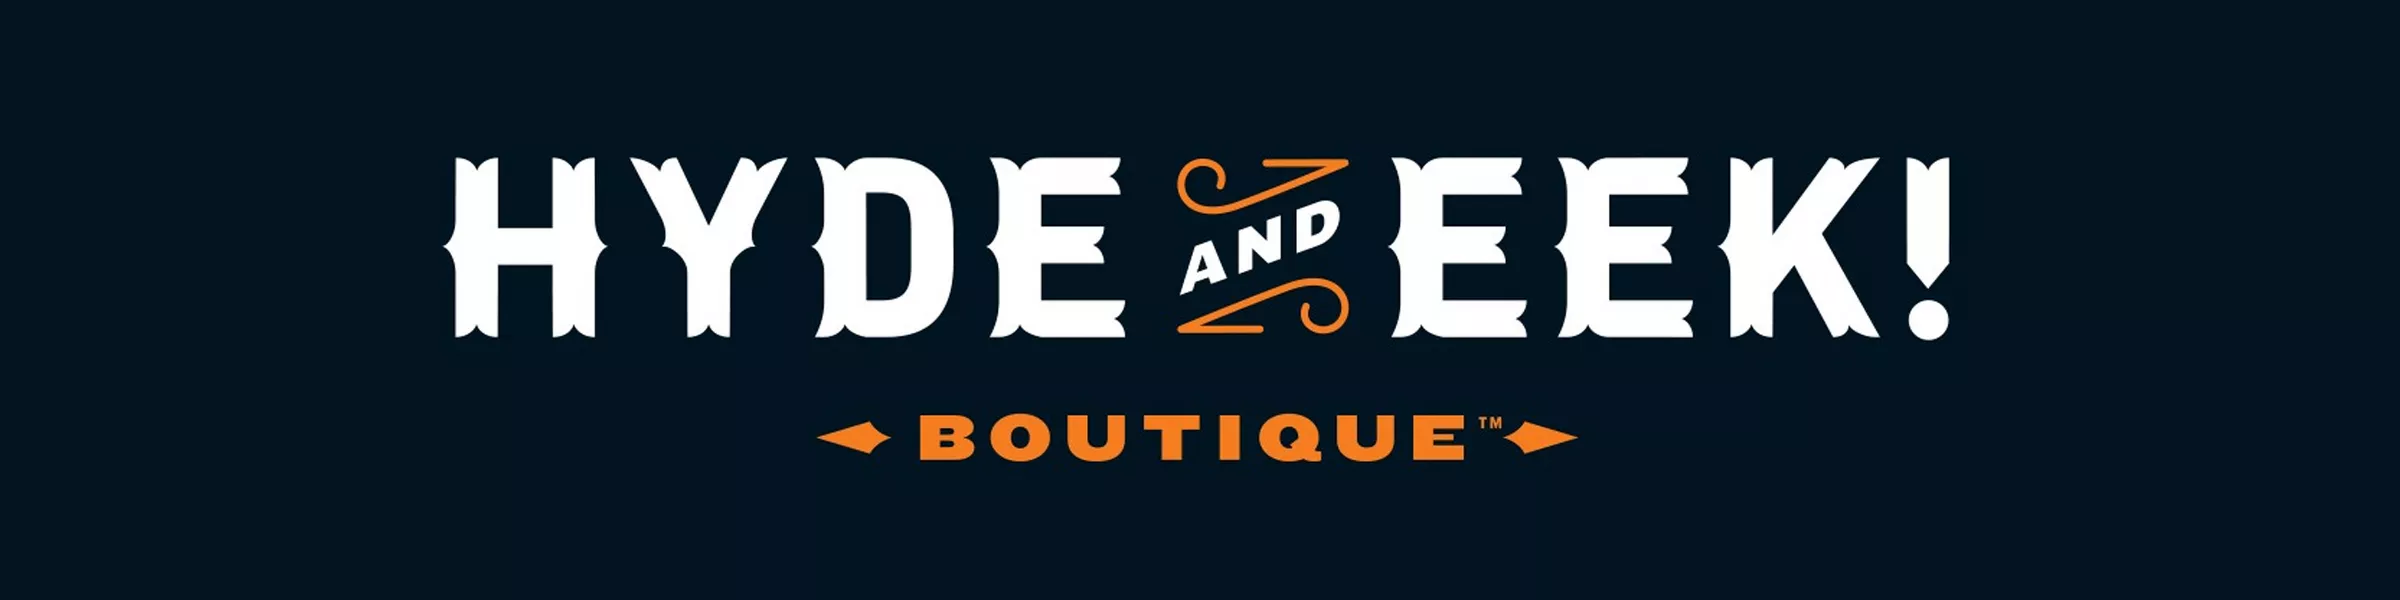 Hyde and Eek Boutique